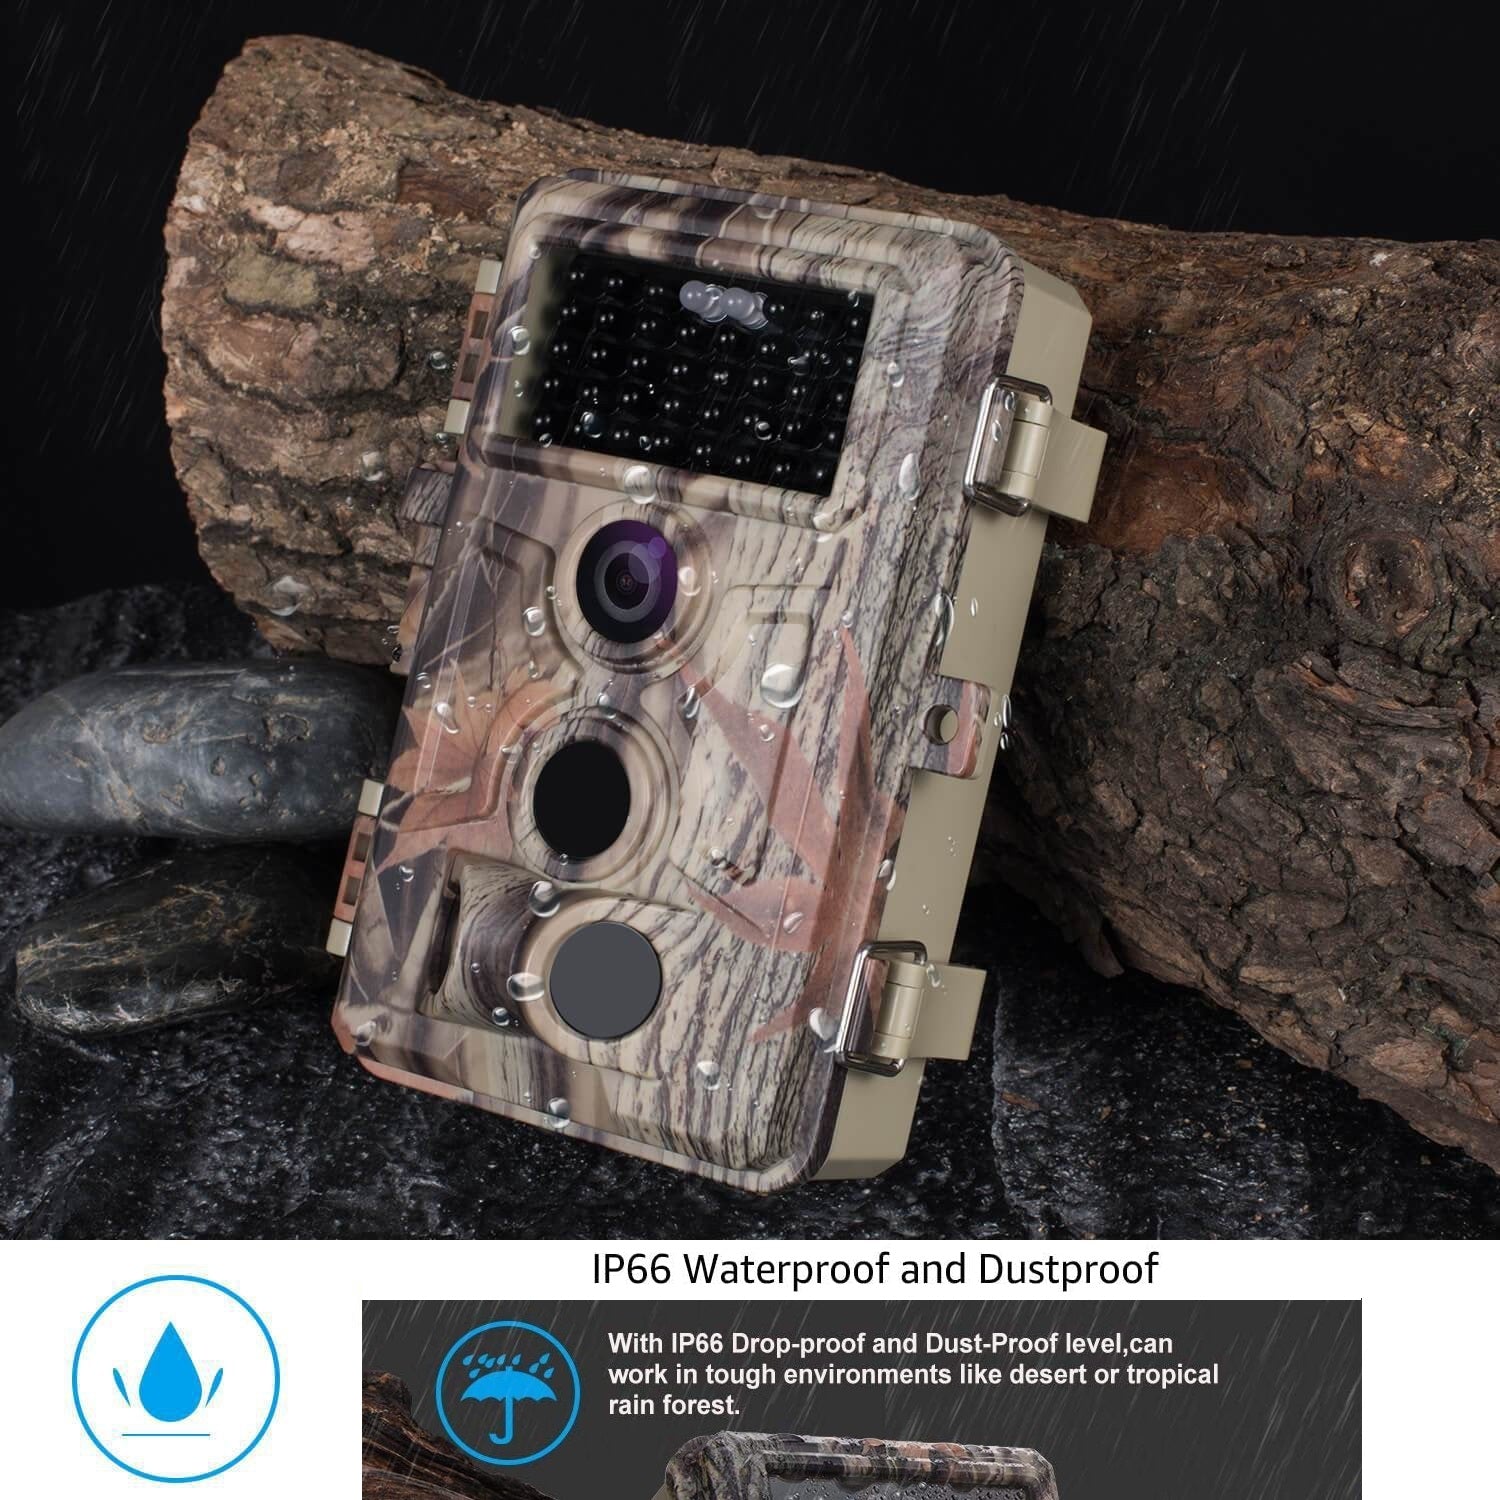 Game Trail Wildlife Hunting Deer Camera 20MP 1080P H.264 MP4/MOV Video with Night Vision Motion Activated Waterproof No Flash